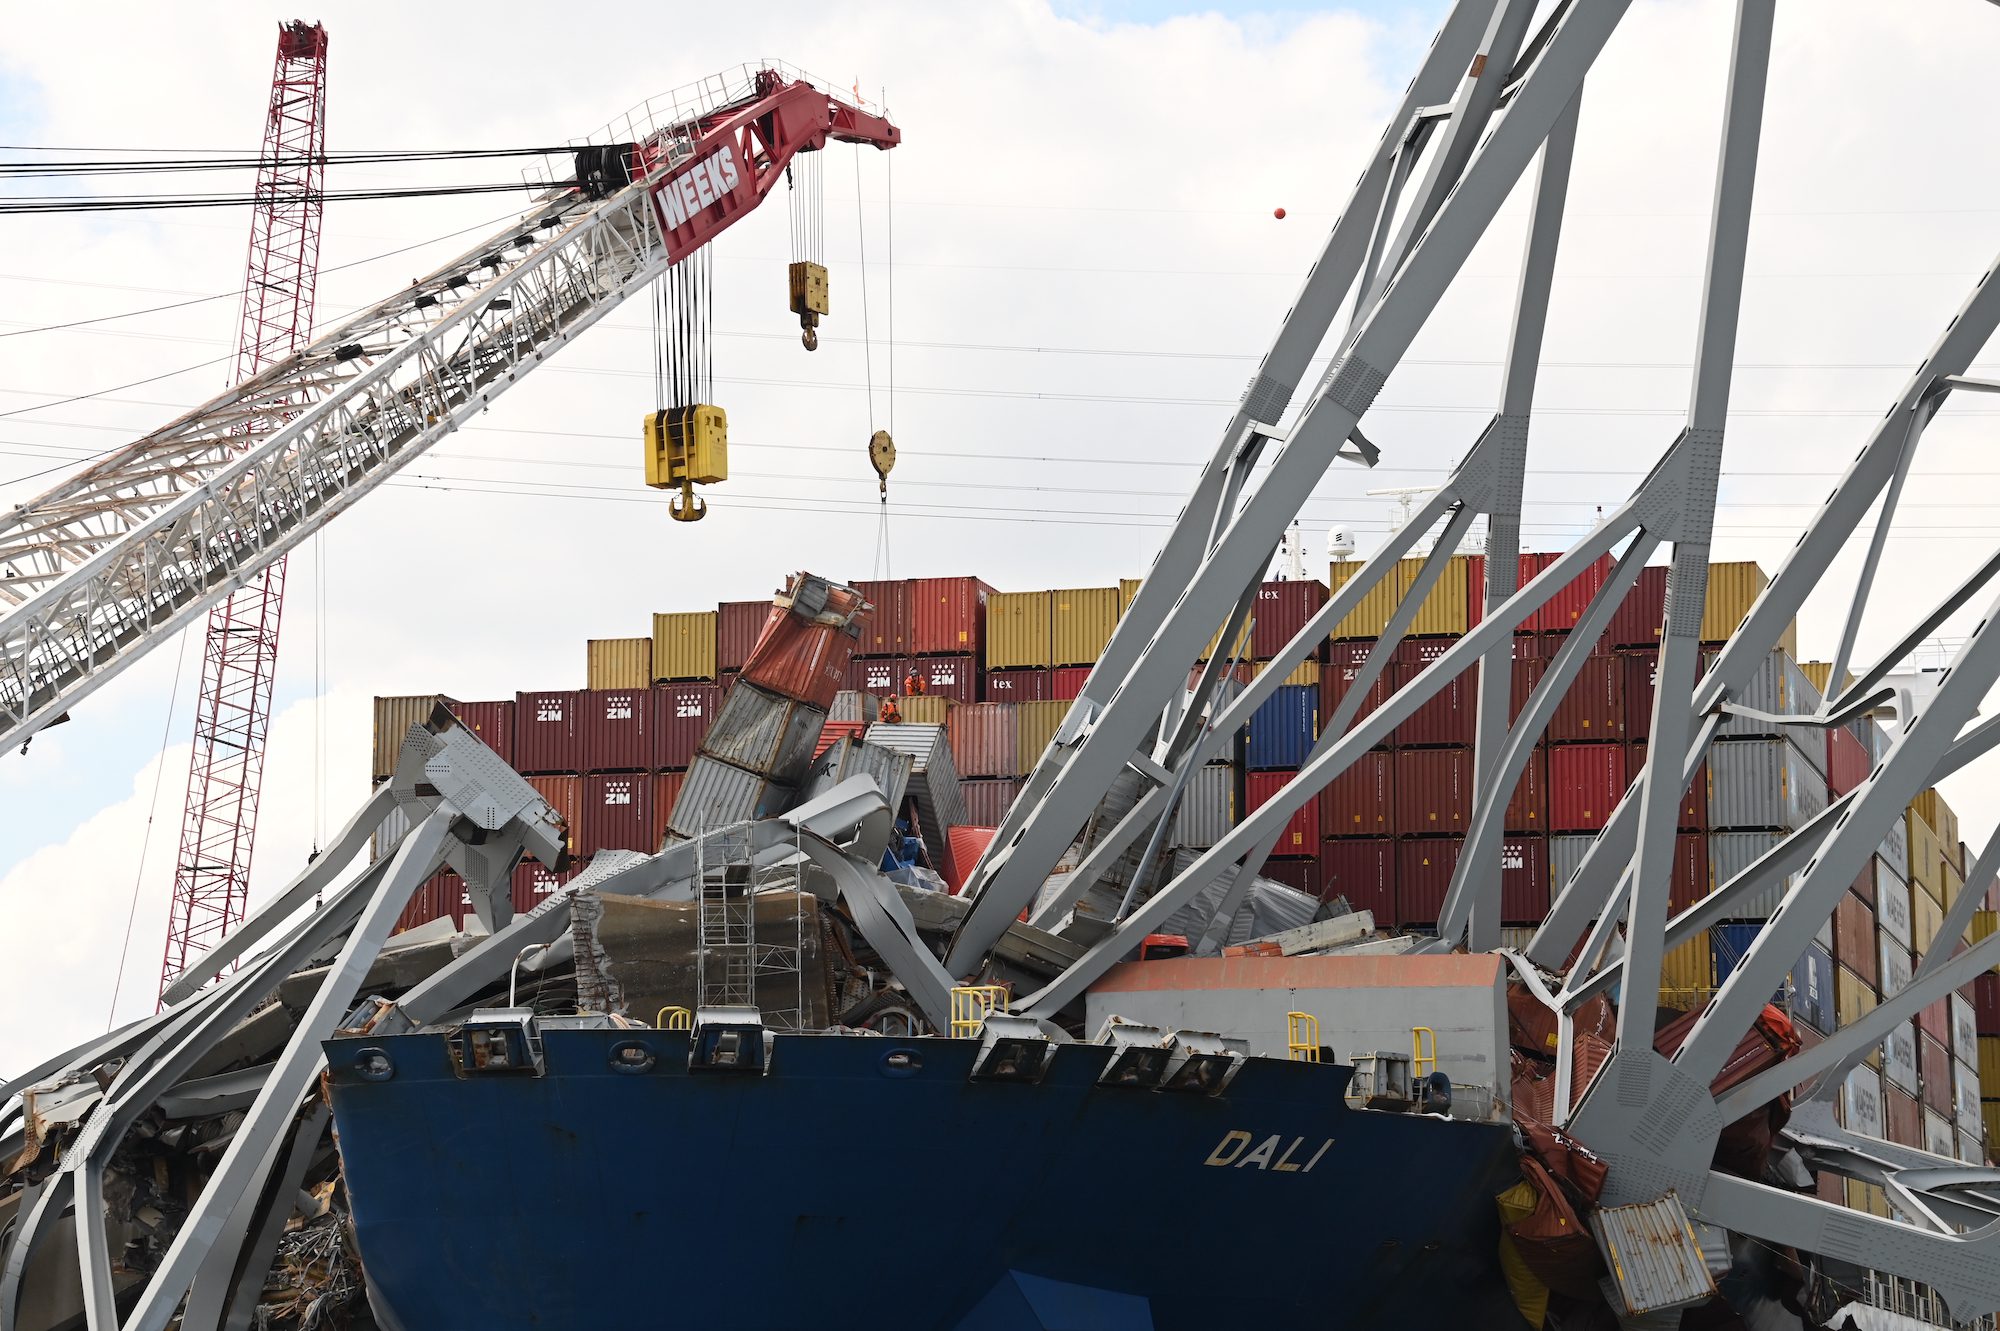 Salvage crews conduct operations onboard M/V Dali to remove wreckage and impacted shipping containers in Baltimore, Maryland, April 10, 2024. U.S. Coast Guard Photo